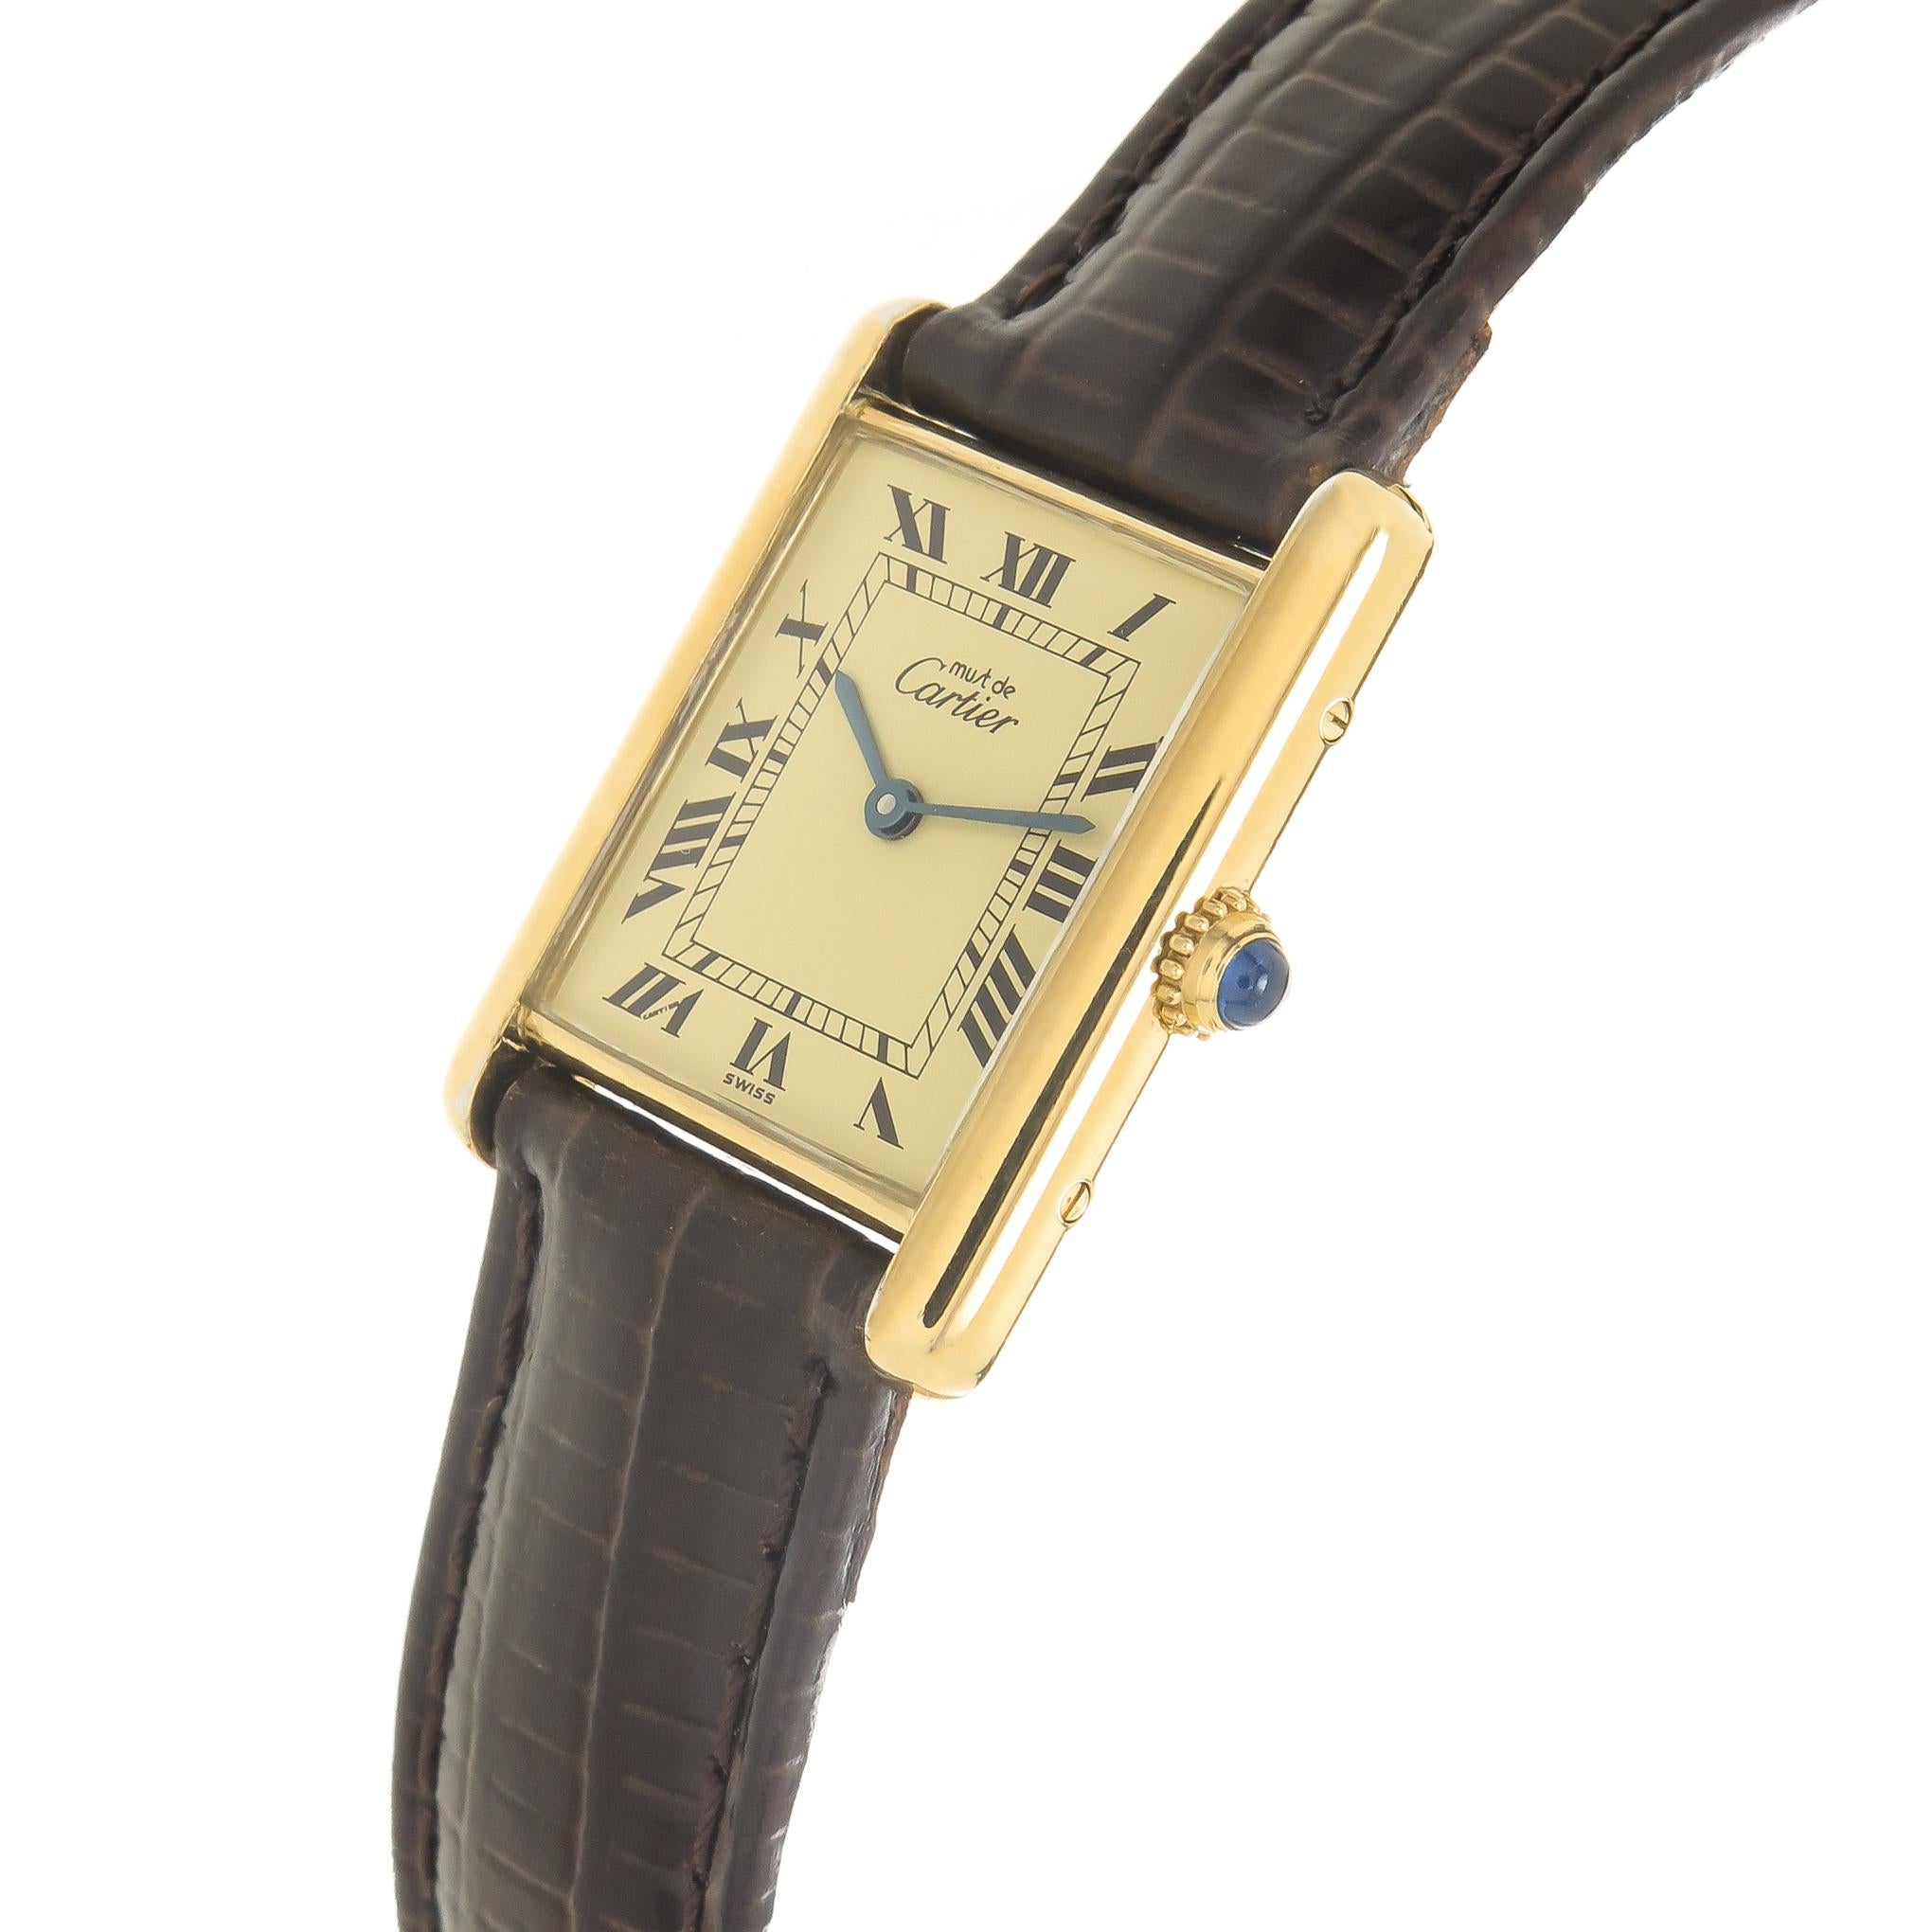 Circa 1990 Cartier Must De Cartier Standard Size Classic Tank Wrist Watch, 30 X 24 MM Vermeil ( Gold plate on Sterling Silver ) 2 Piece case.  Cream dial with Black Roman Numerals, quartz movement, sapphire crown. New Hadly Roma Brown padded Leather